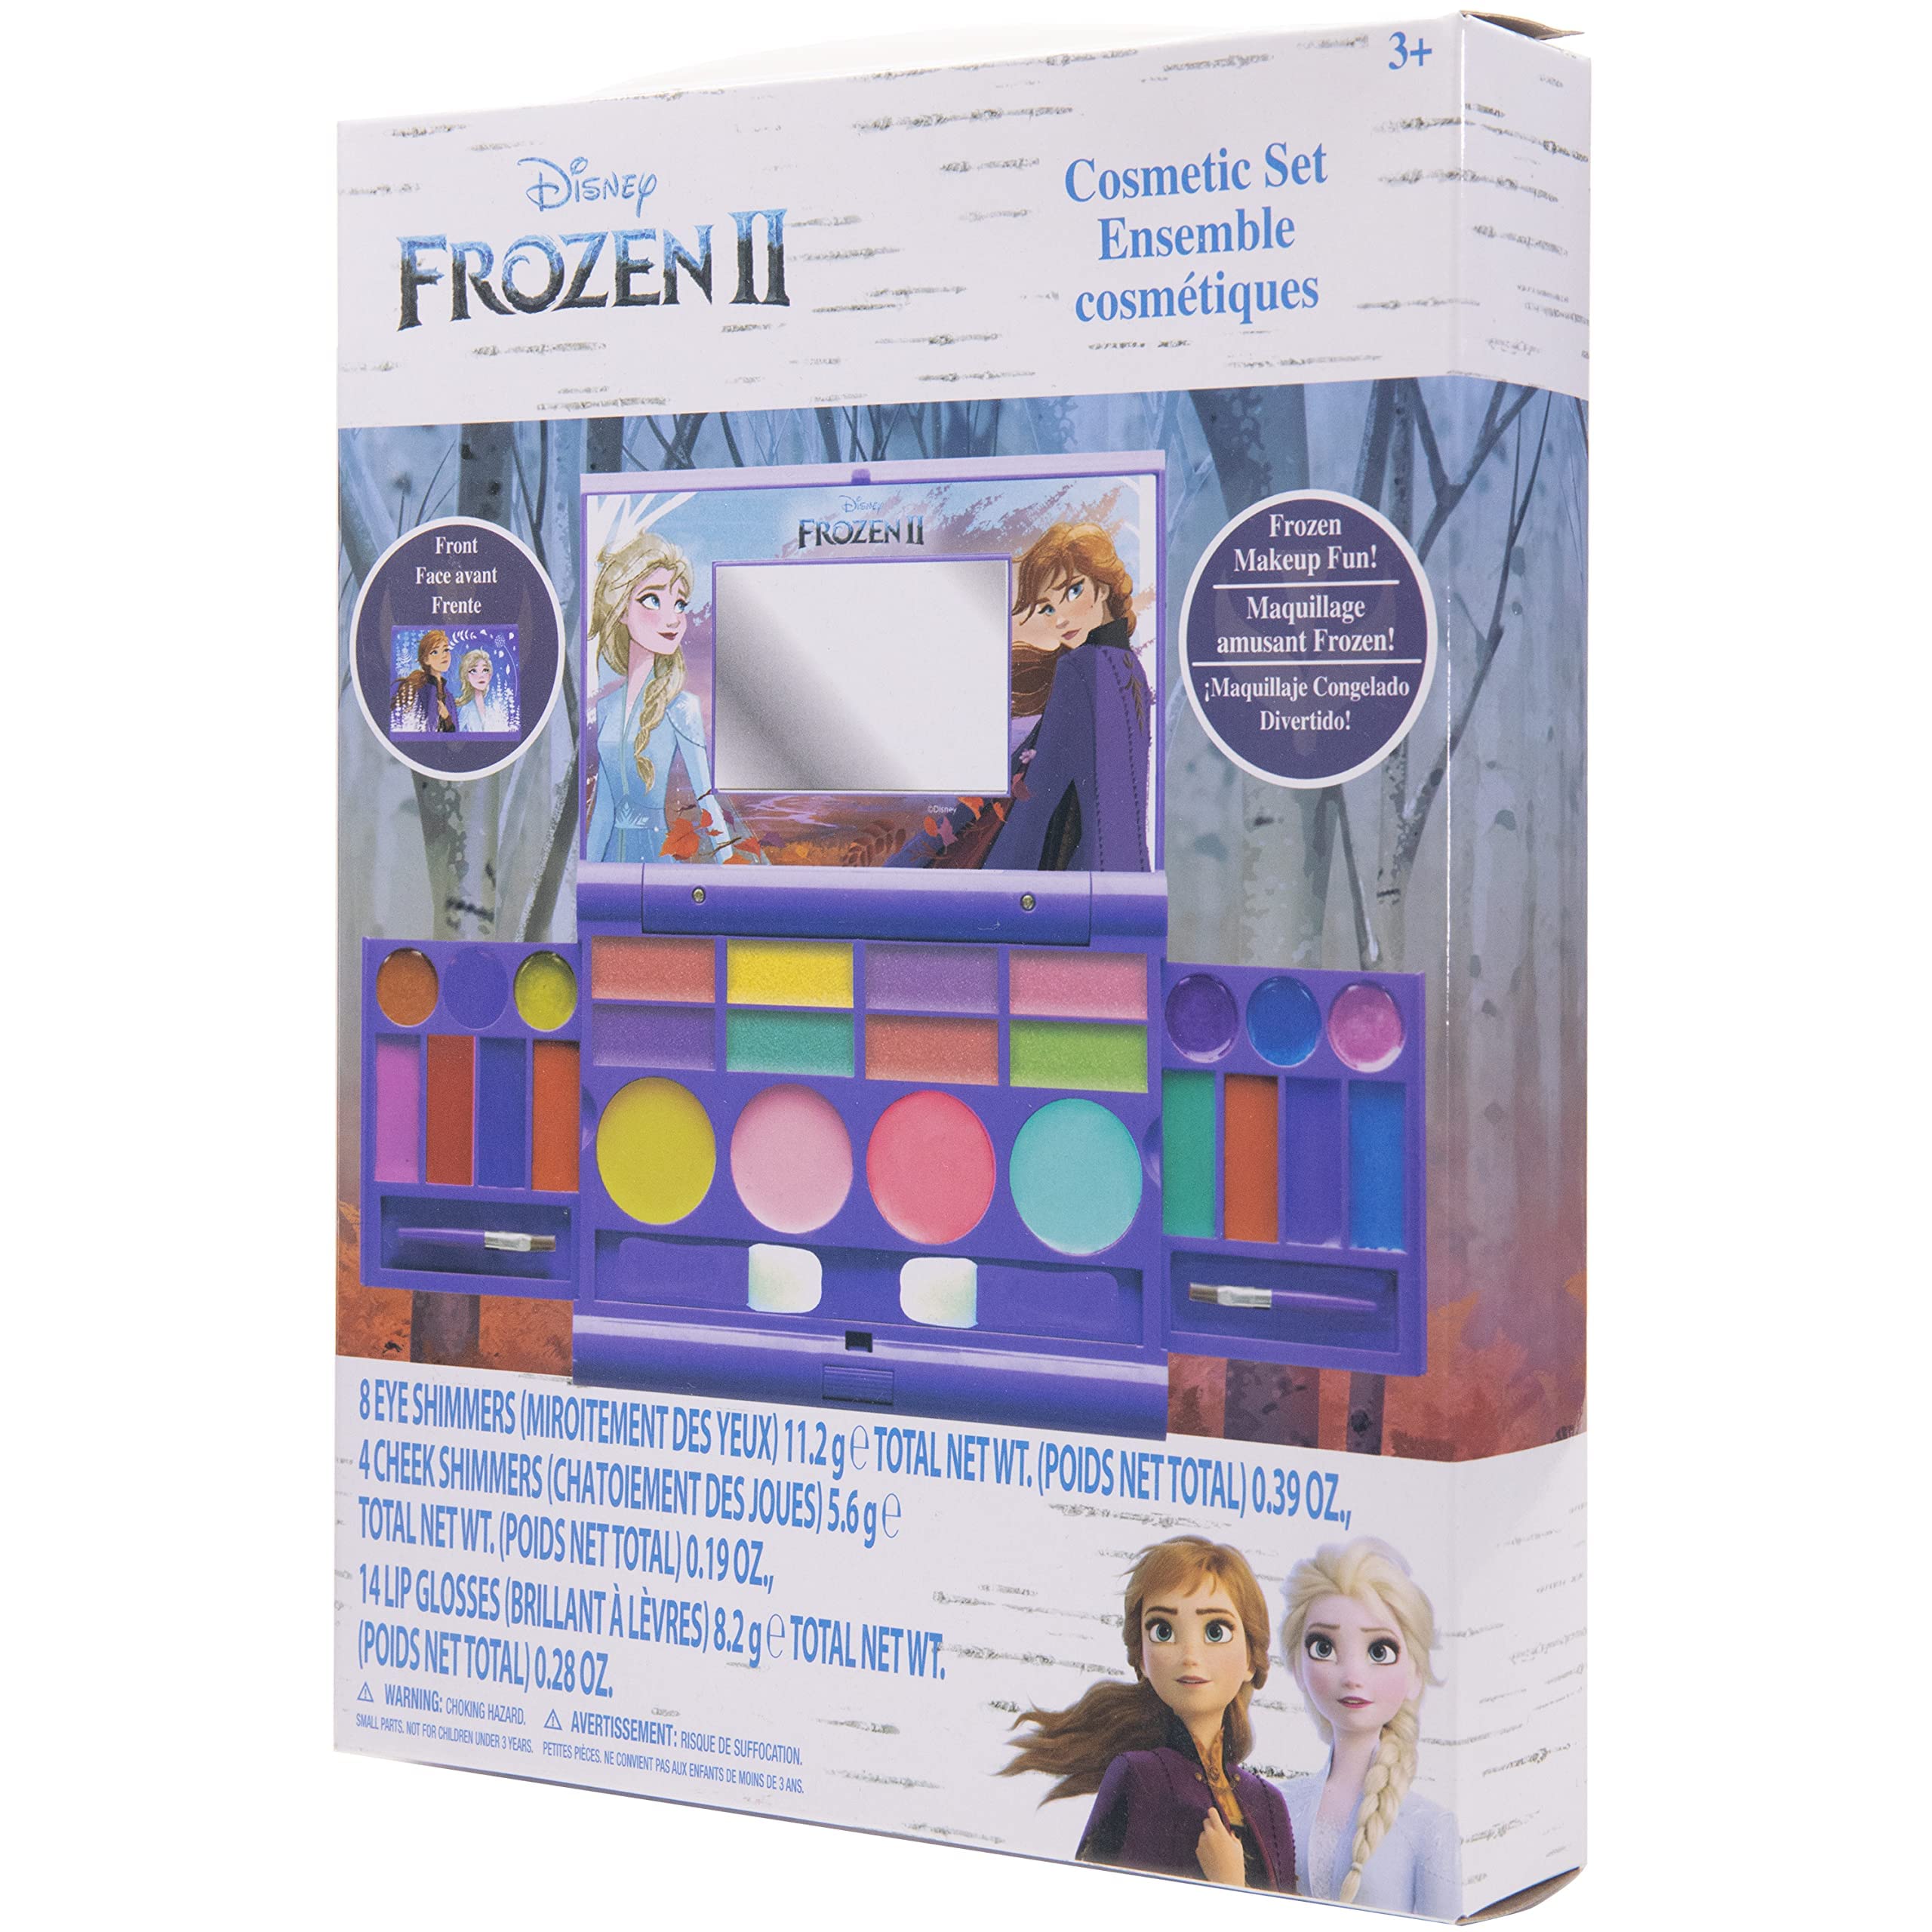 Disney Frozen Elsa Anna Cosmetic Compact Set with Mirror 22 Lip glosses, 4 Body Shines, 6 Brushes Colorful Portable Foldable Washable Makeup Beauty Kit Box Set for Girls Kids Toddler